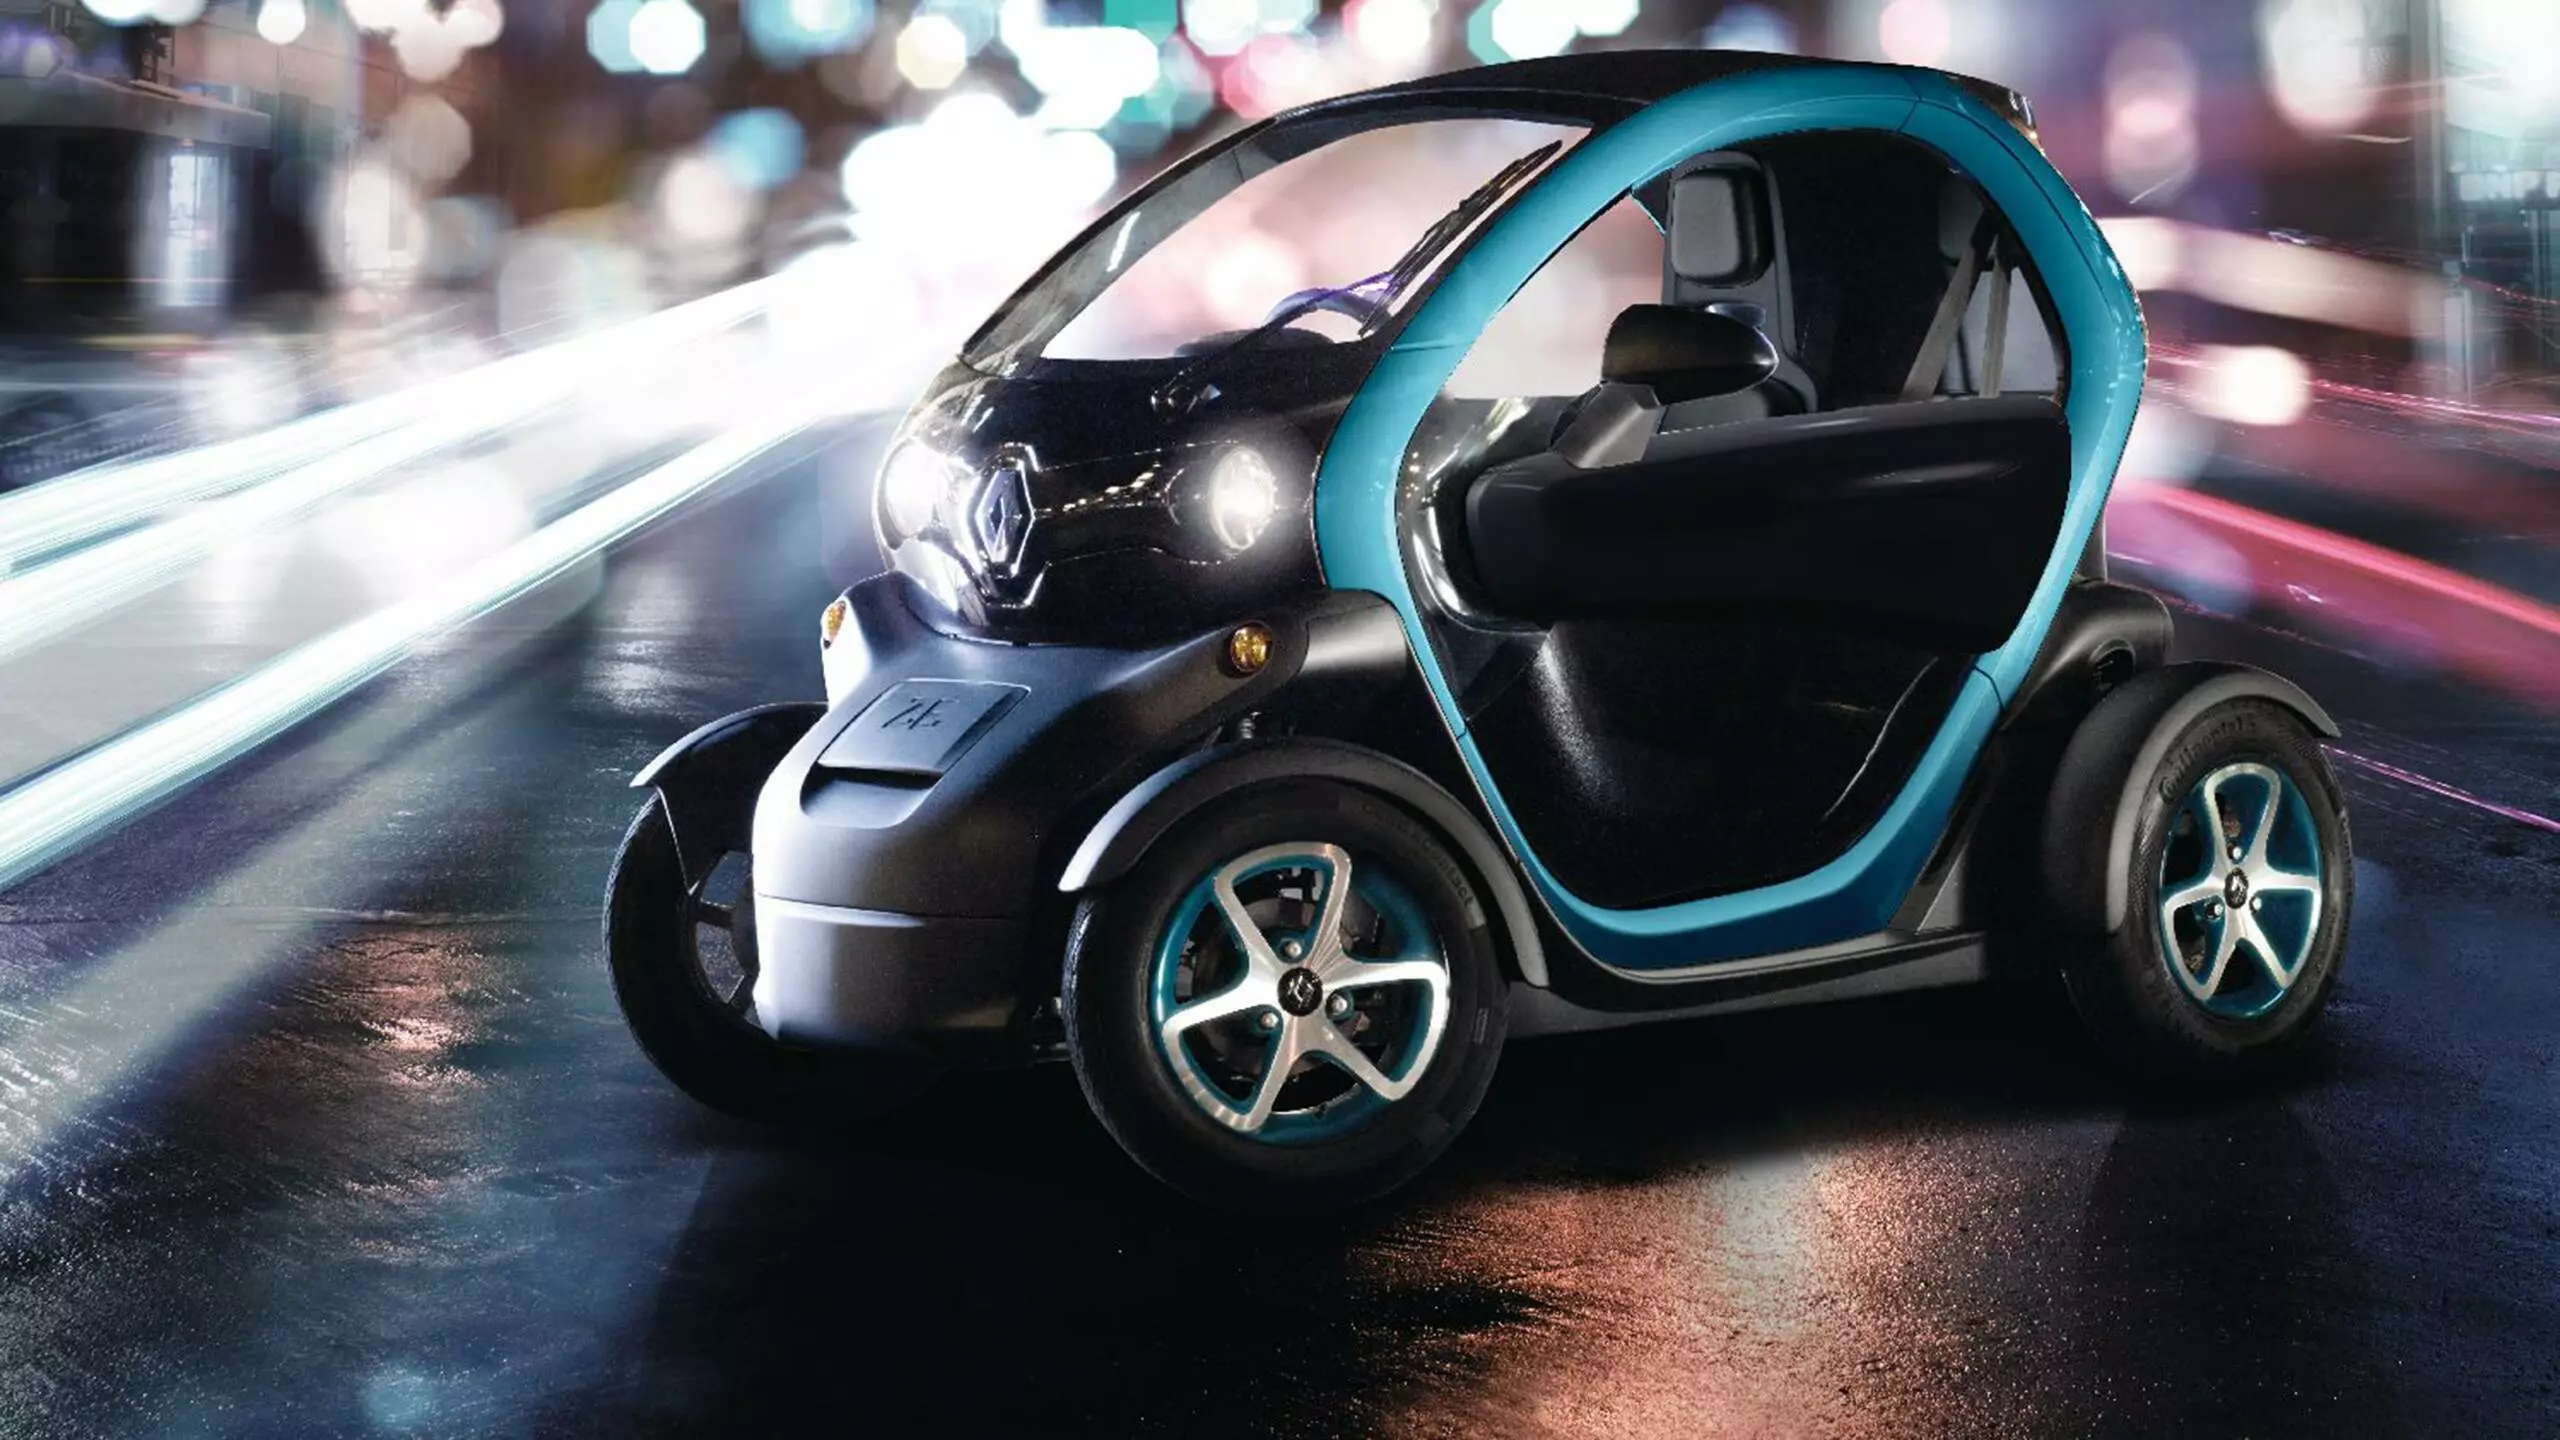 Renault Twizy, one of the currently most affordable small electric vehicles on the market. Source: Renault